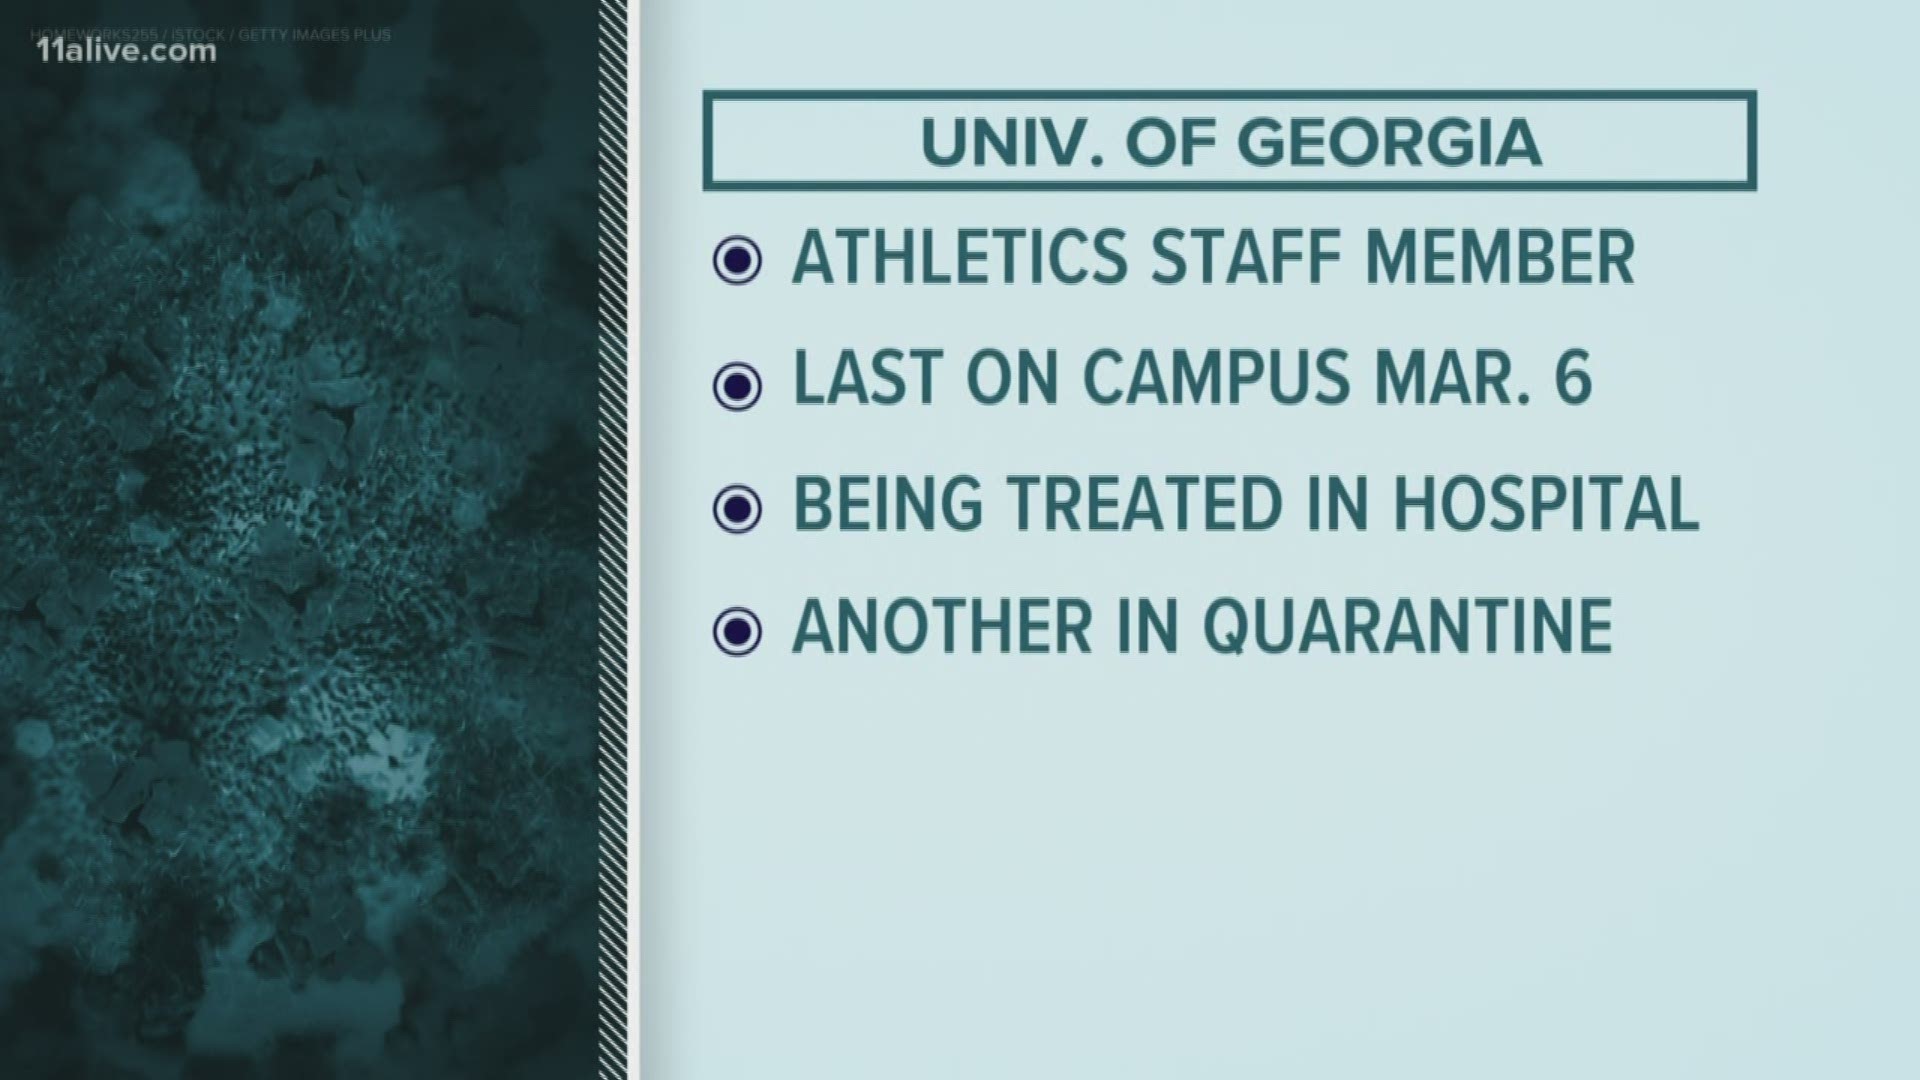 A staff member who works in the athletics department at the University of Georgia has tested positive for COVID-19, the school said in a letter to students.